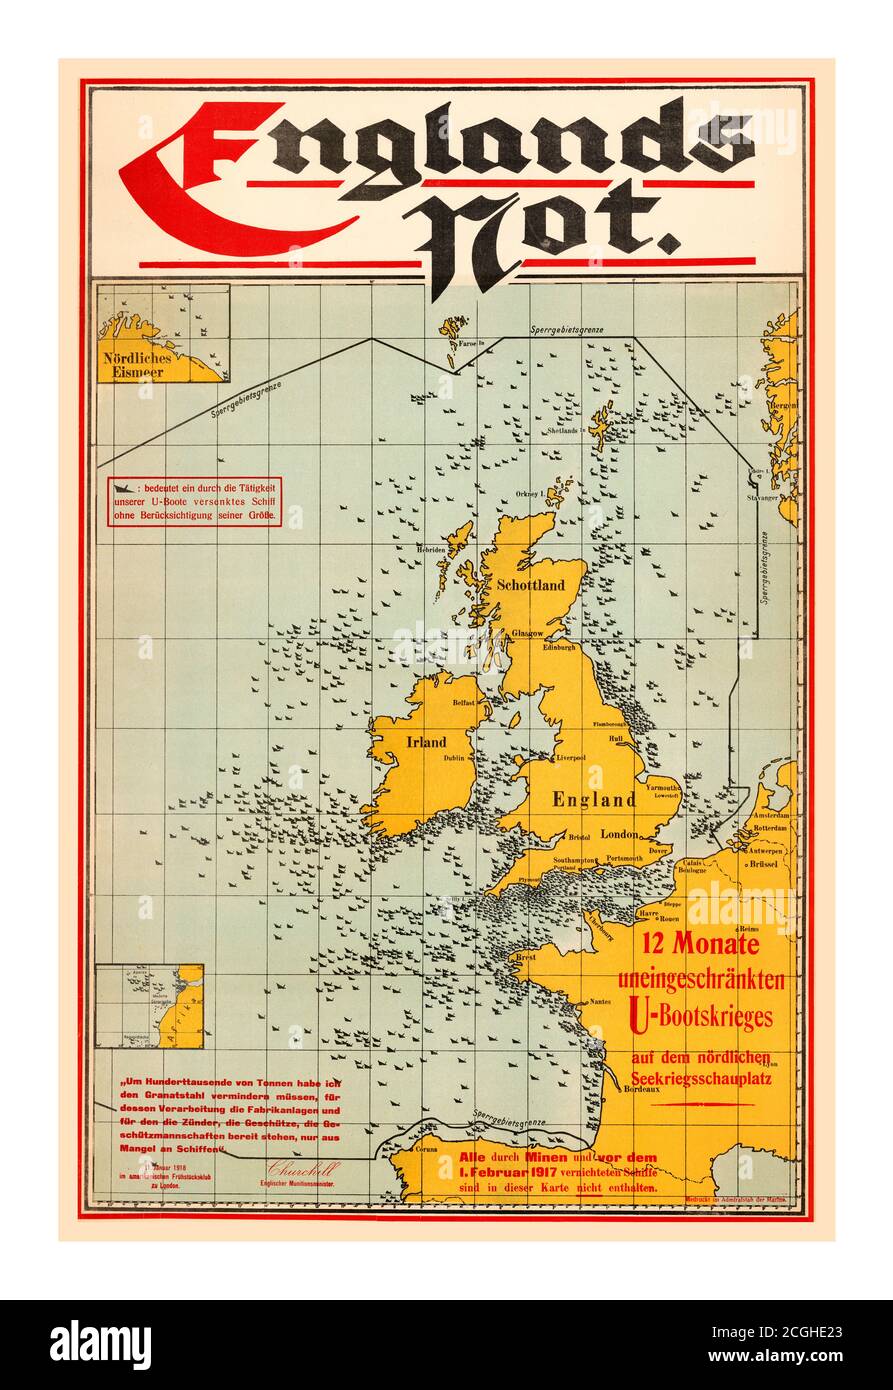 Vintage German WW1 propaganda poster map of 'England's Torment,' issued by the German Admiralty in early 1918, it was intended to reassure the German public that the war was going well. The poster trumpets the German successes during '12 months of unrestricted submarine warfare' in the waters around Britain. Each symbol represents one ship 'sunken by our submarines' - and those ships that were destroyed by U-boats before February 1917, or by German mines at any time, are expressly not included. The quote at the lower left is from a speech by Winston Churchill, then the British Ministe Stock Photo